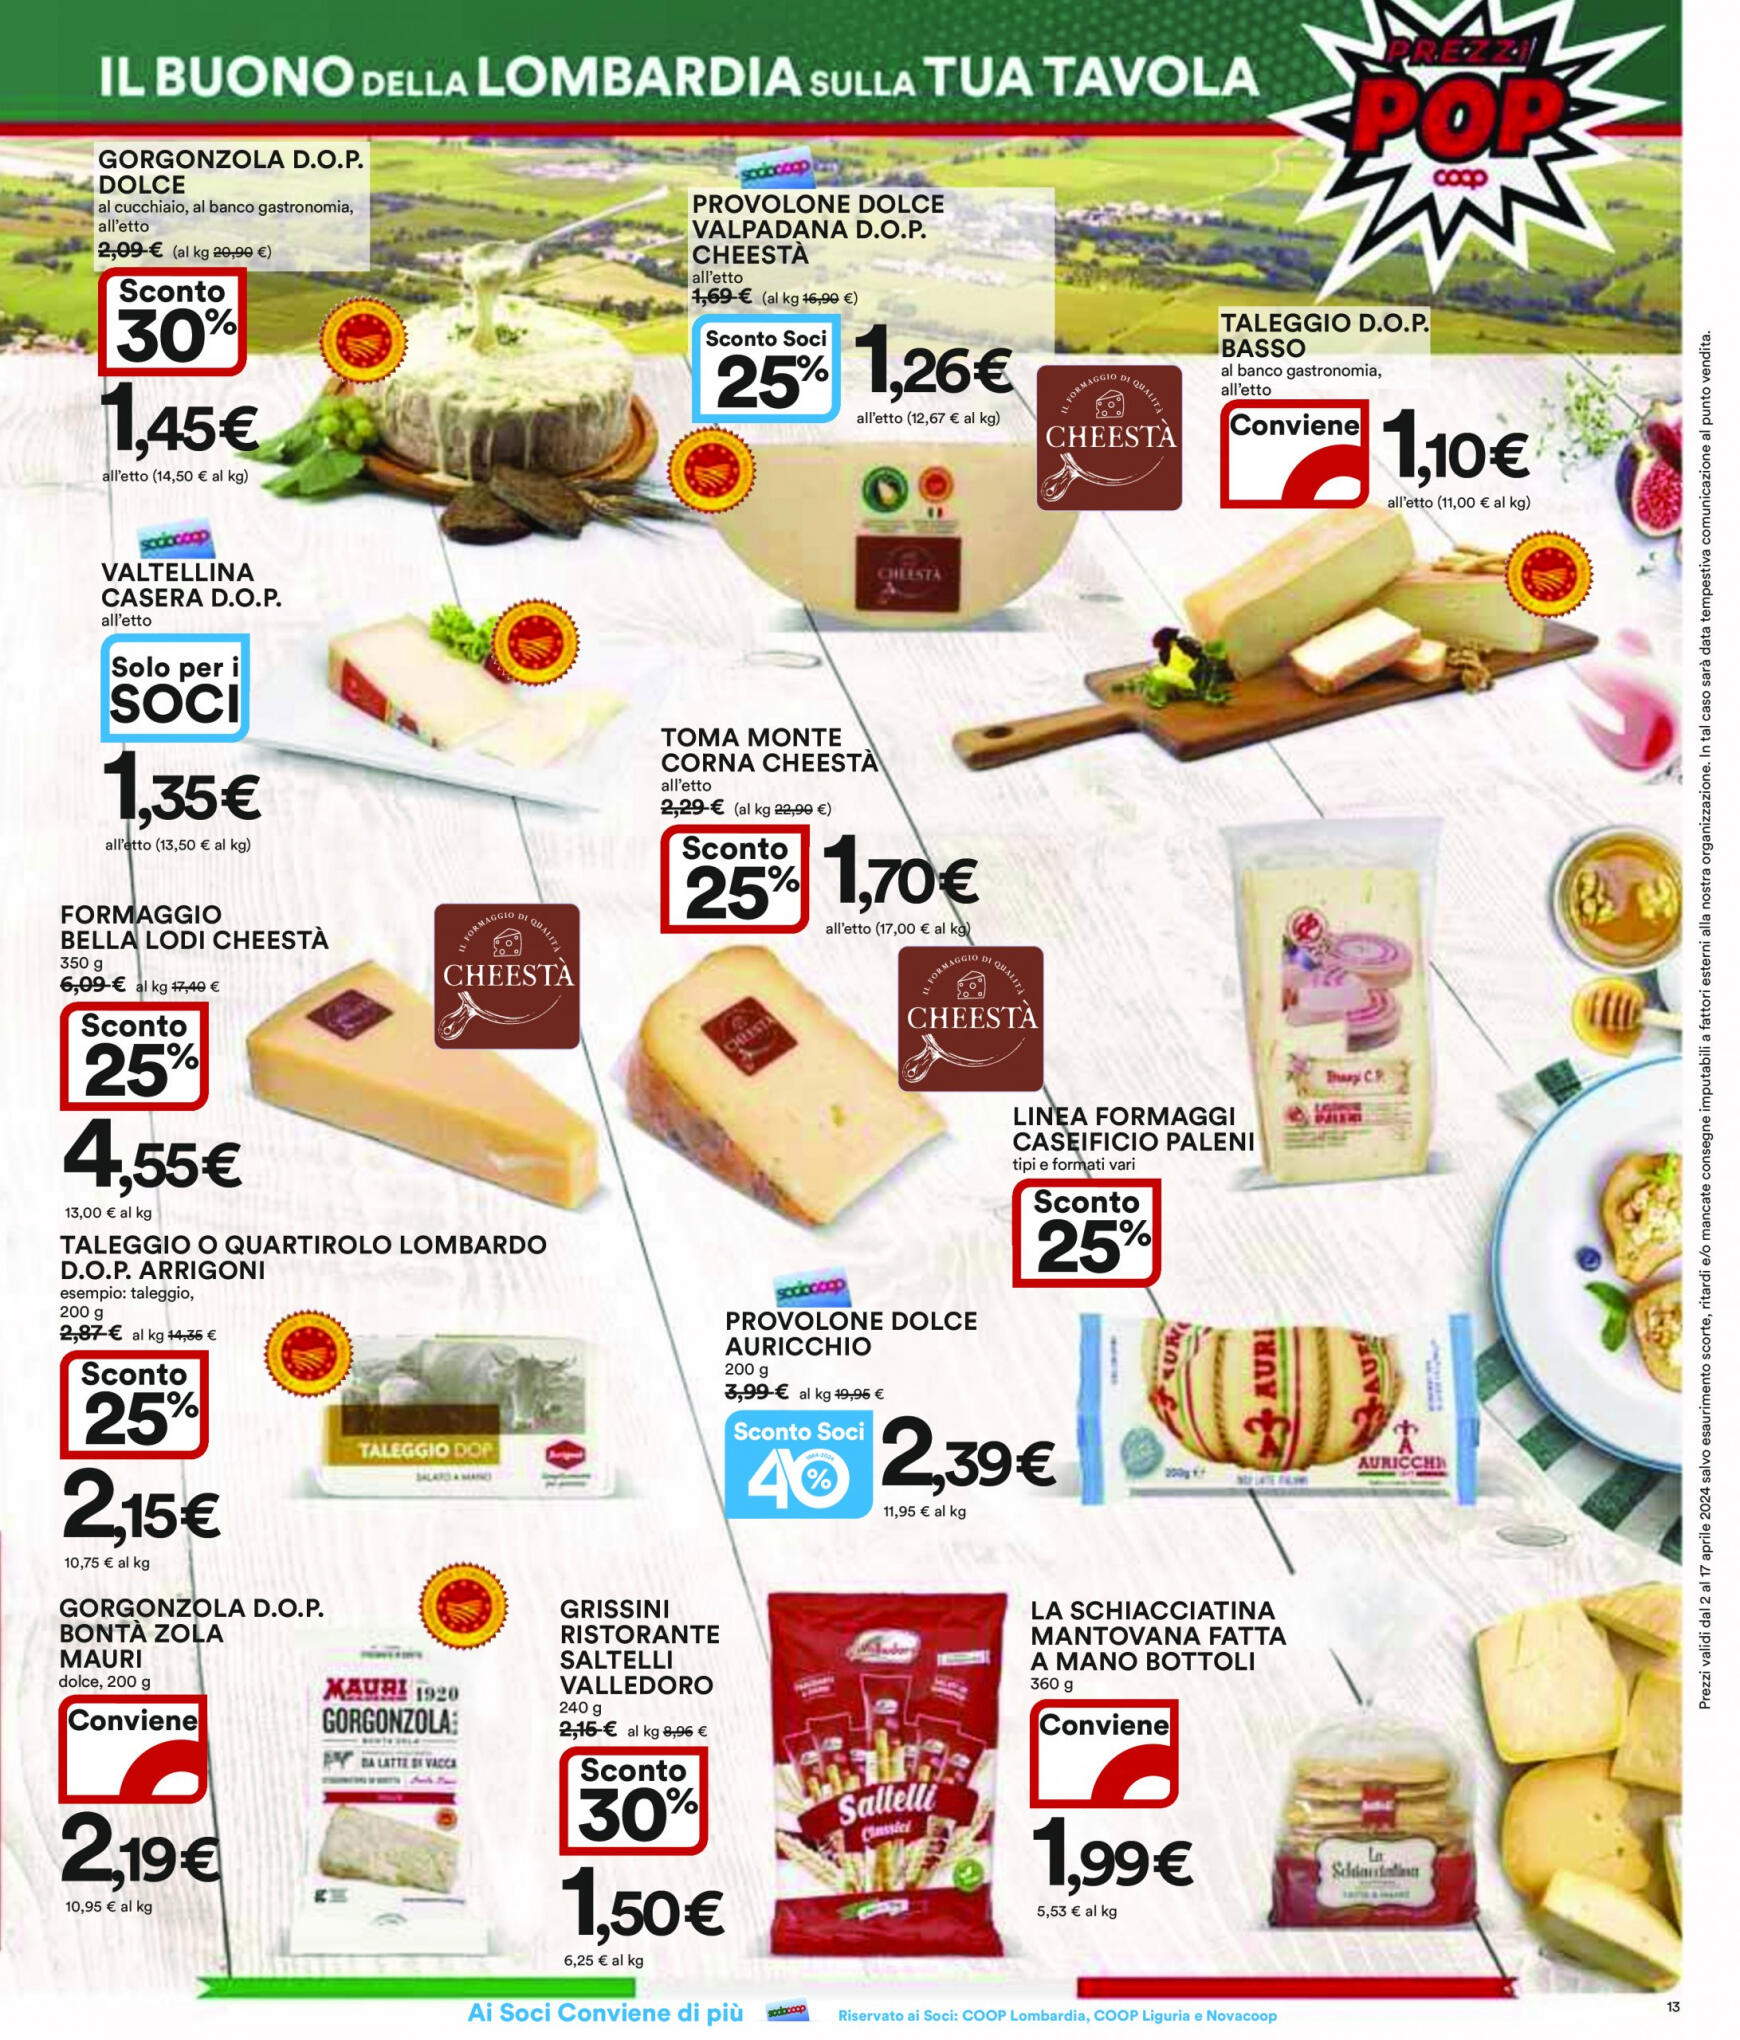 coop - Nuovo volantino Coop 02.04. - 17.04. - page: 13